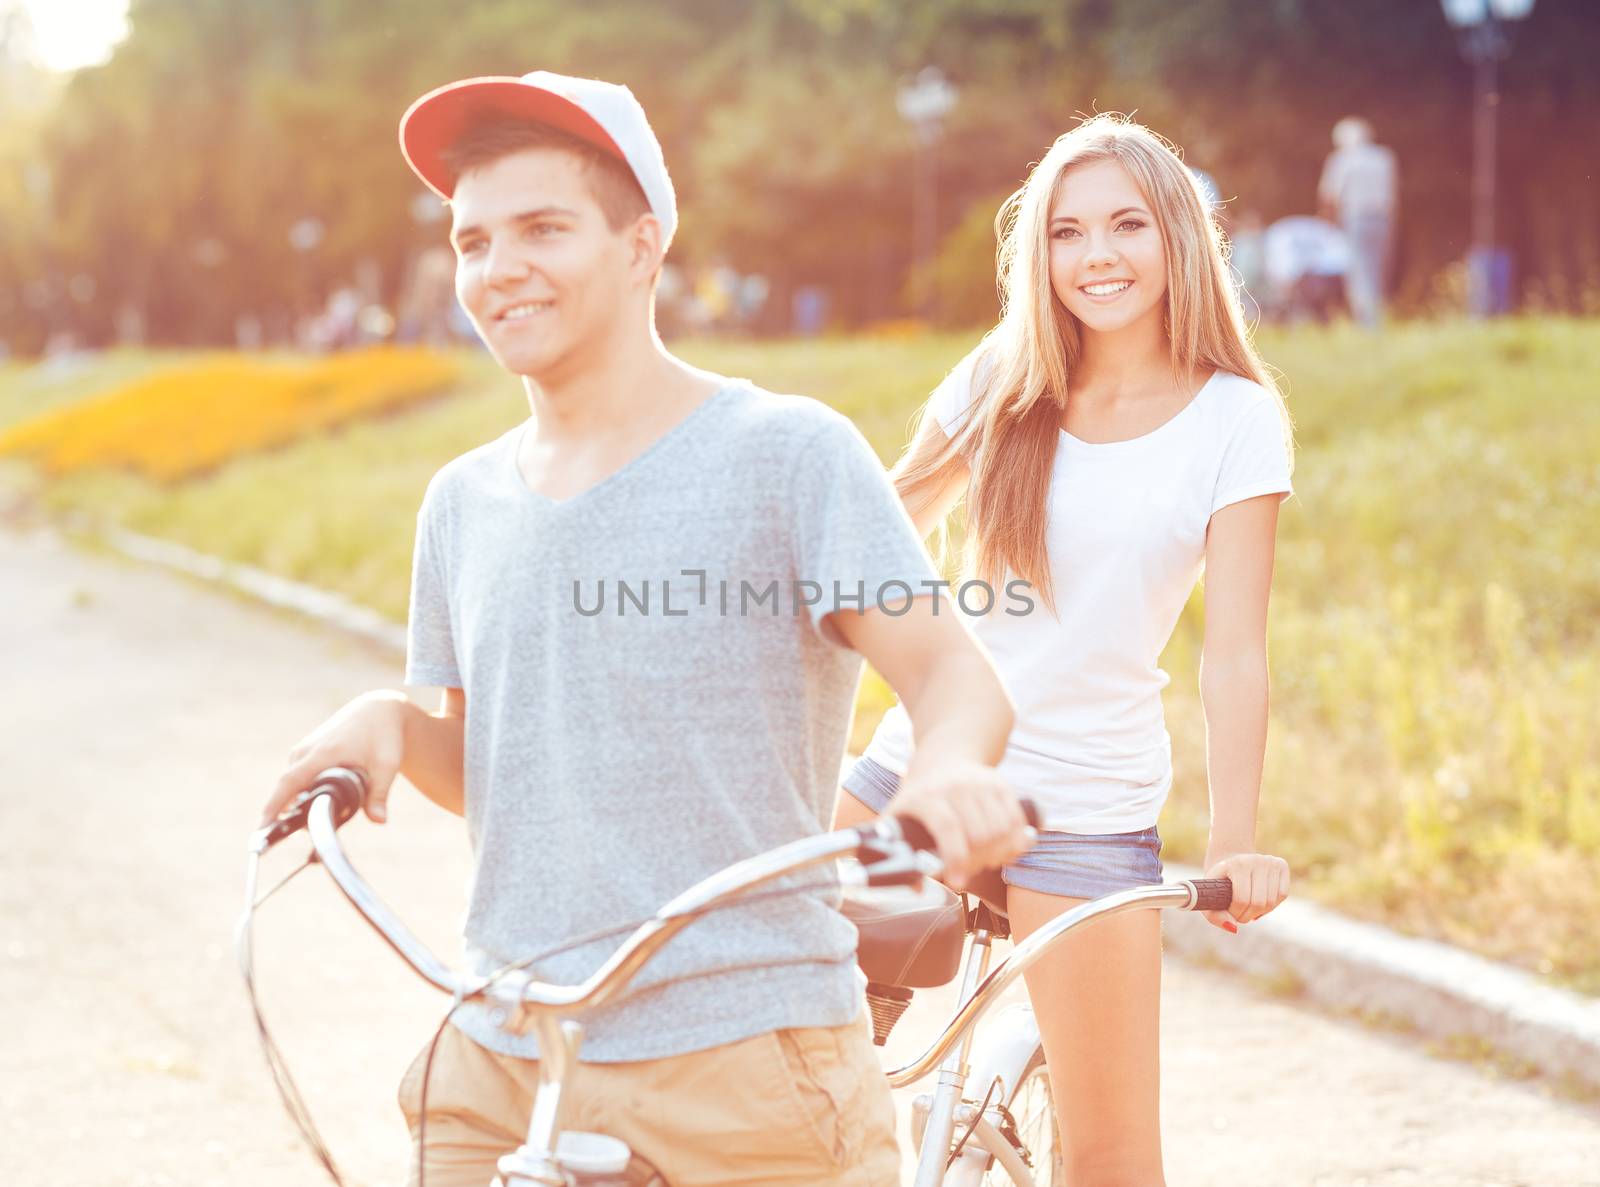 Young man and woman riding a bicycle in the park outdoors by vlad_star